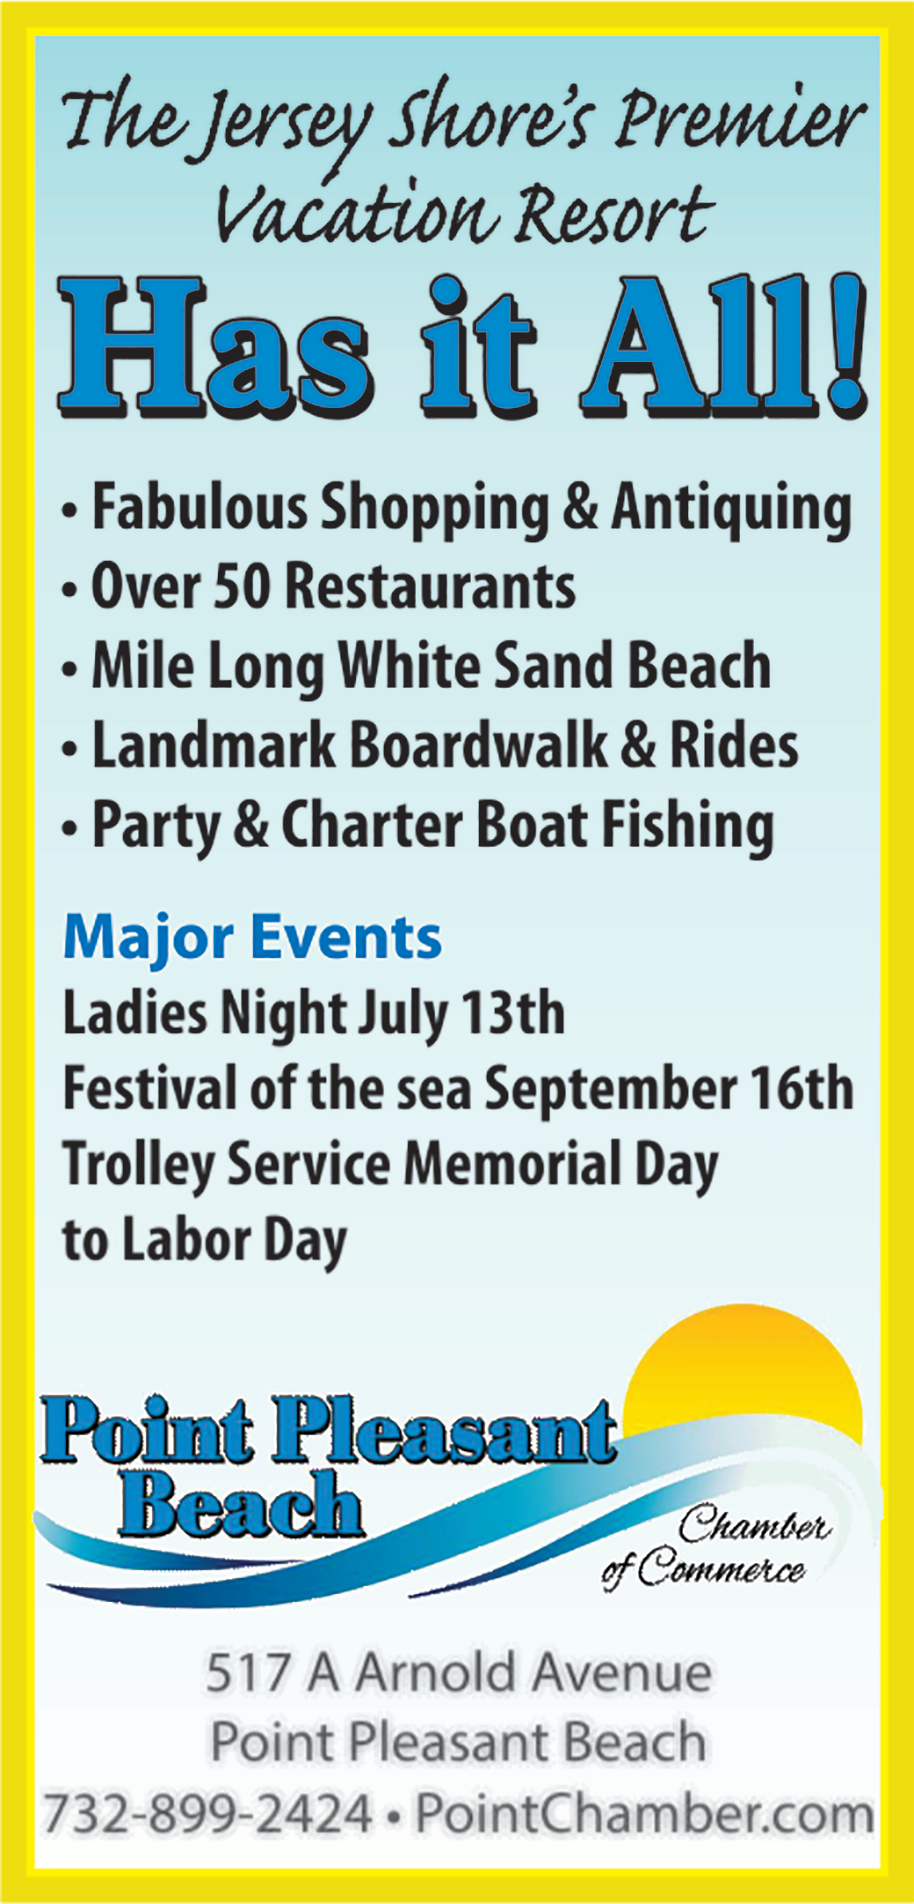 Point Pleasant Beach Chamber of Commerce Print Ad